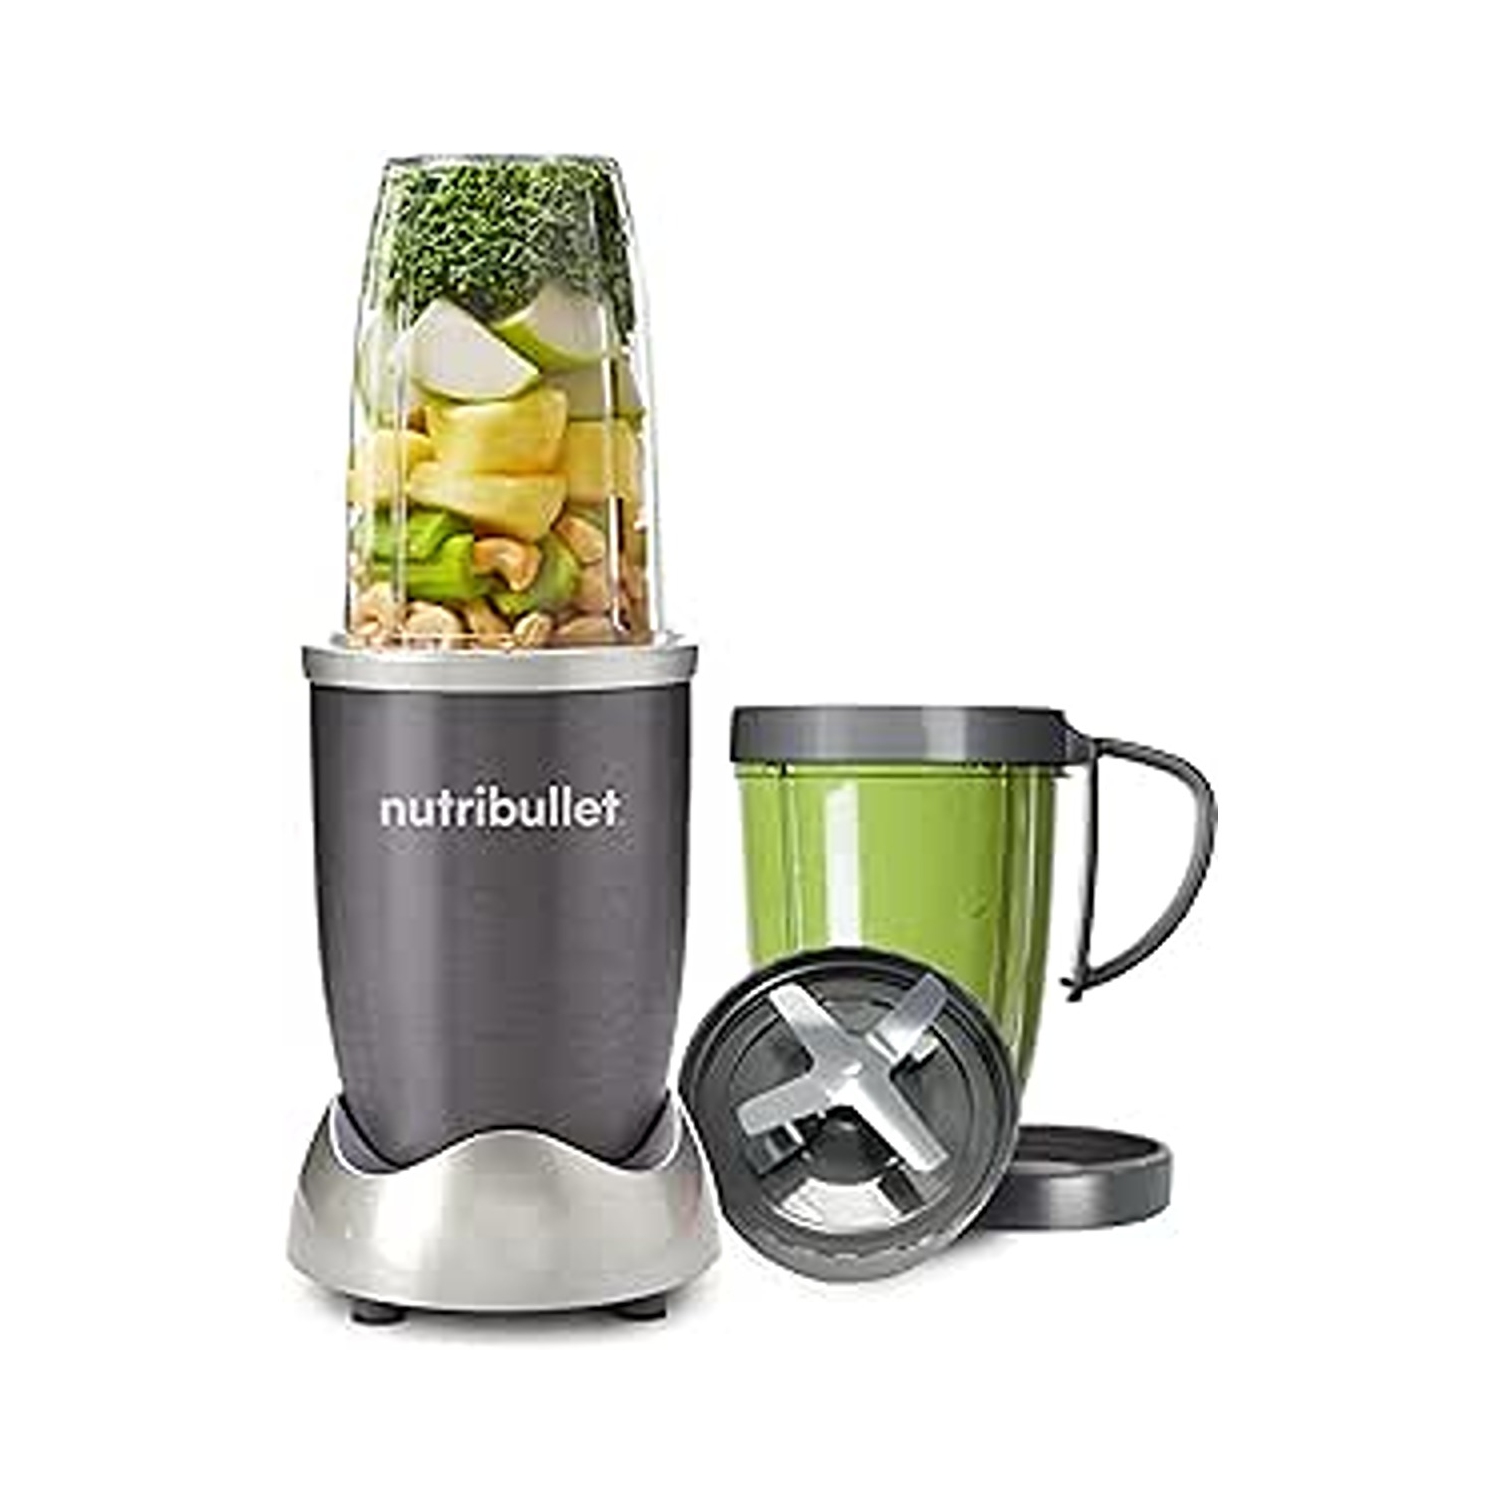 Nutribullet 600W Superfood Nutrition Extractor Blender And Mixer System - Silver